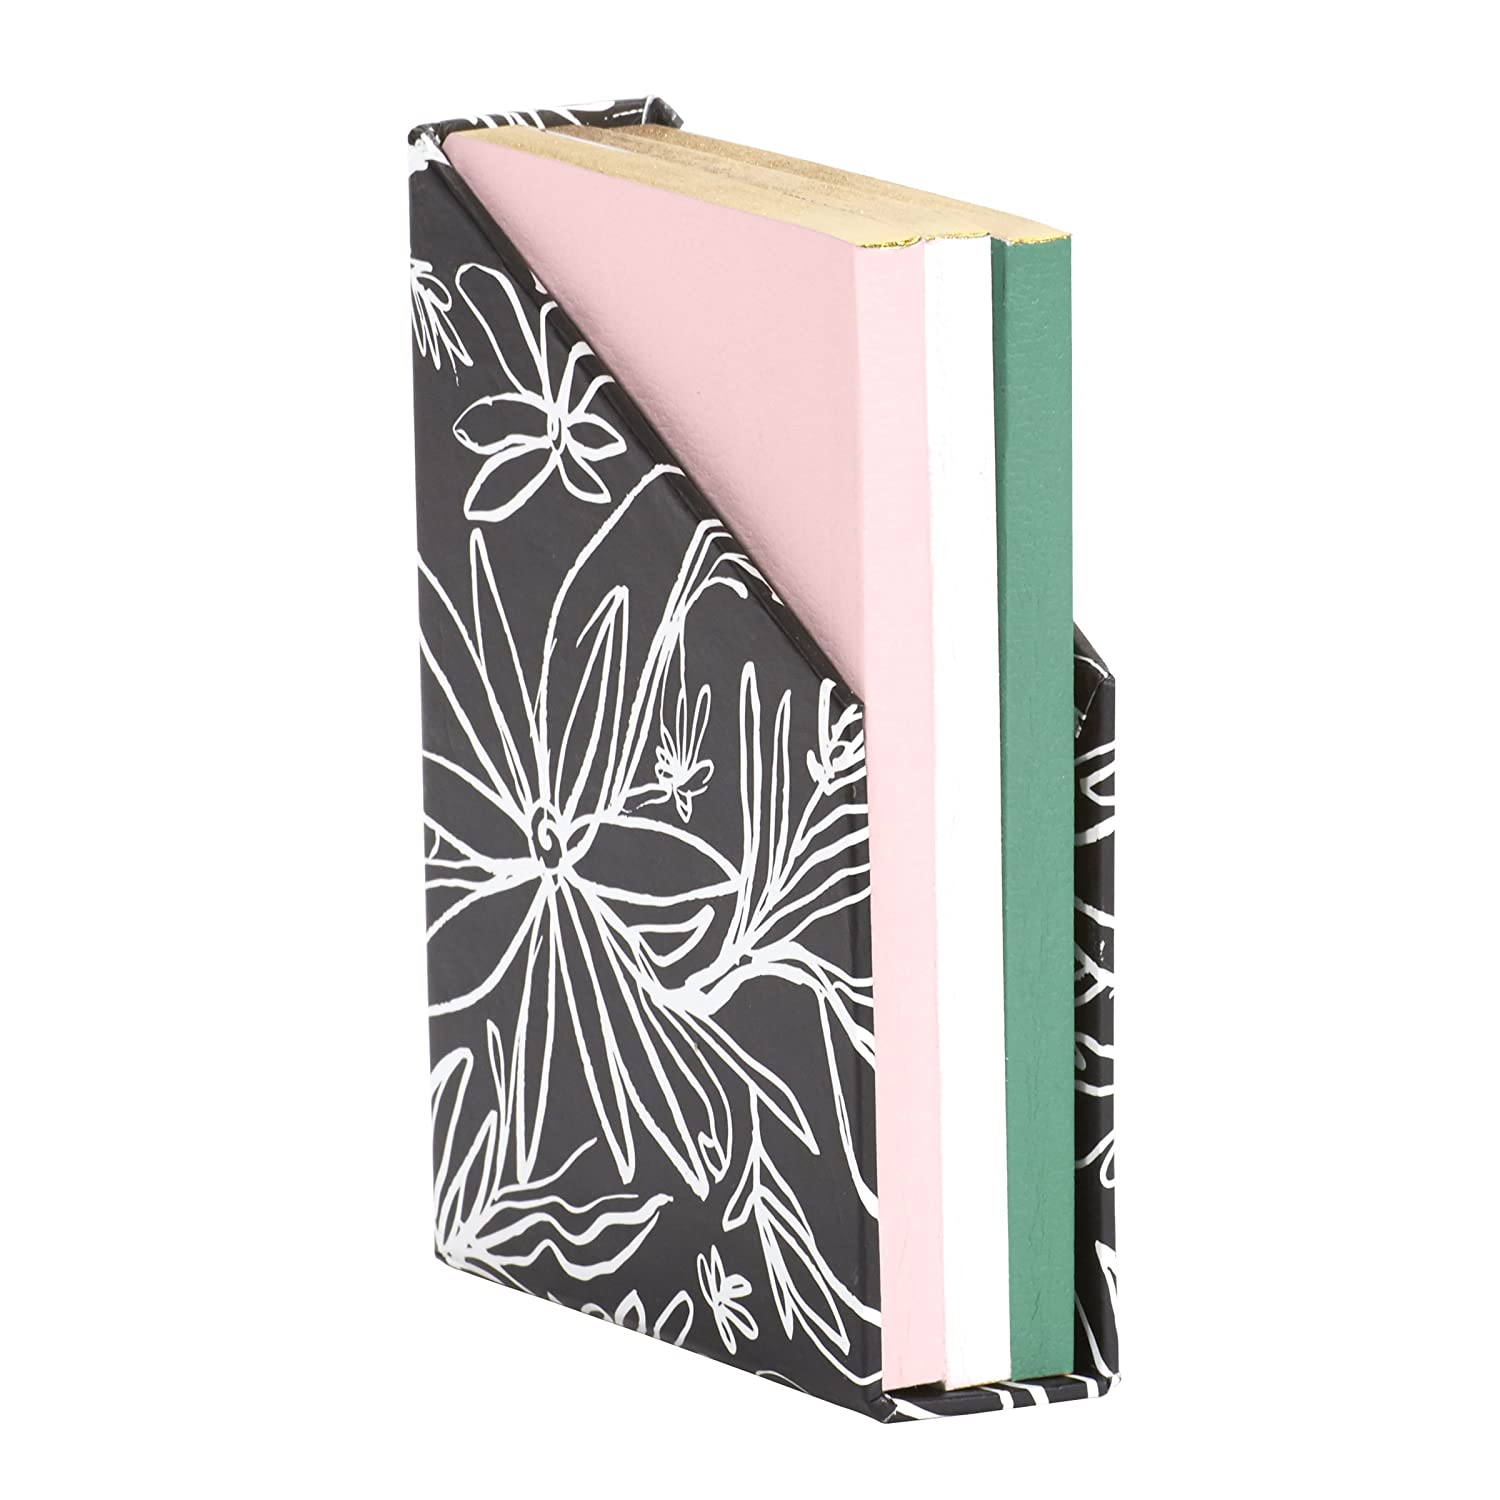 alt="Mini flex organic journal set with black and white floral enclosure and pink, white and green journals with black cursive sentiments"